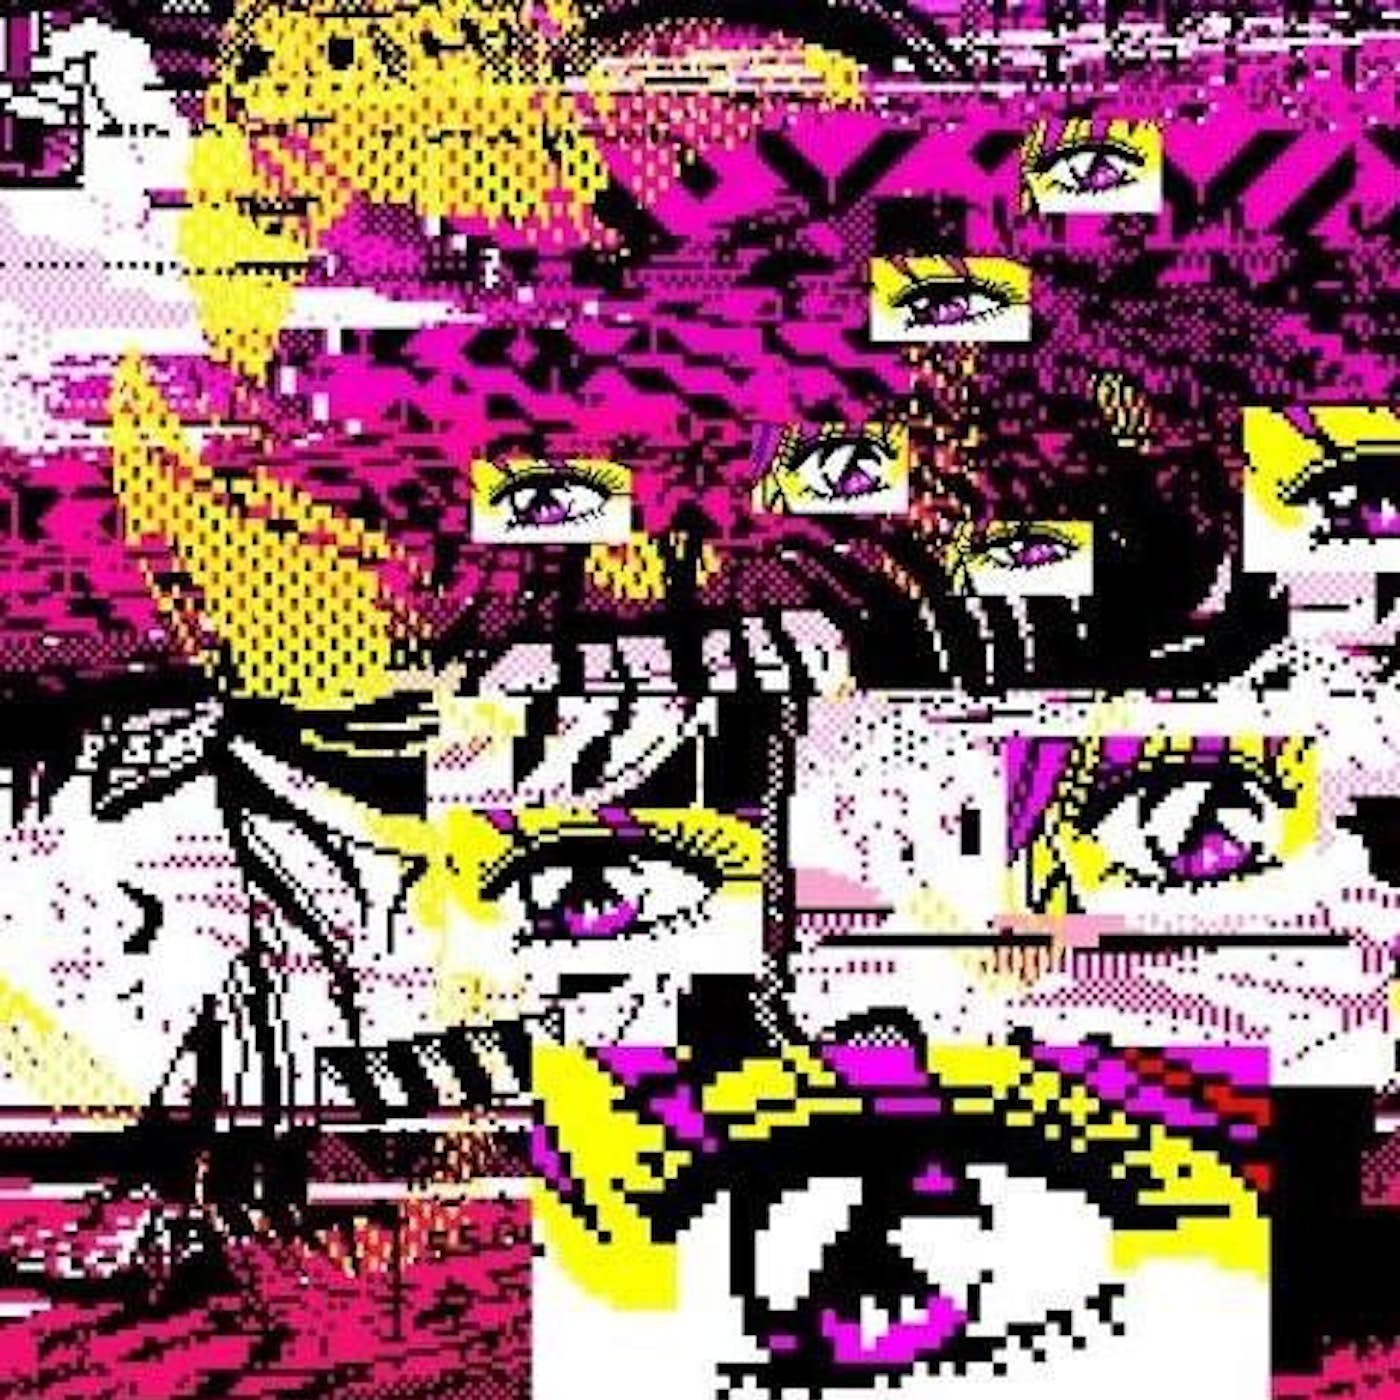 A digital collage of images of eyes, some with thick black lines around them, set against a purple and pink background. - Webcore